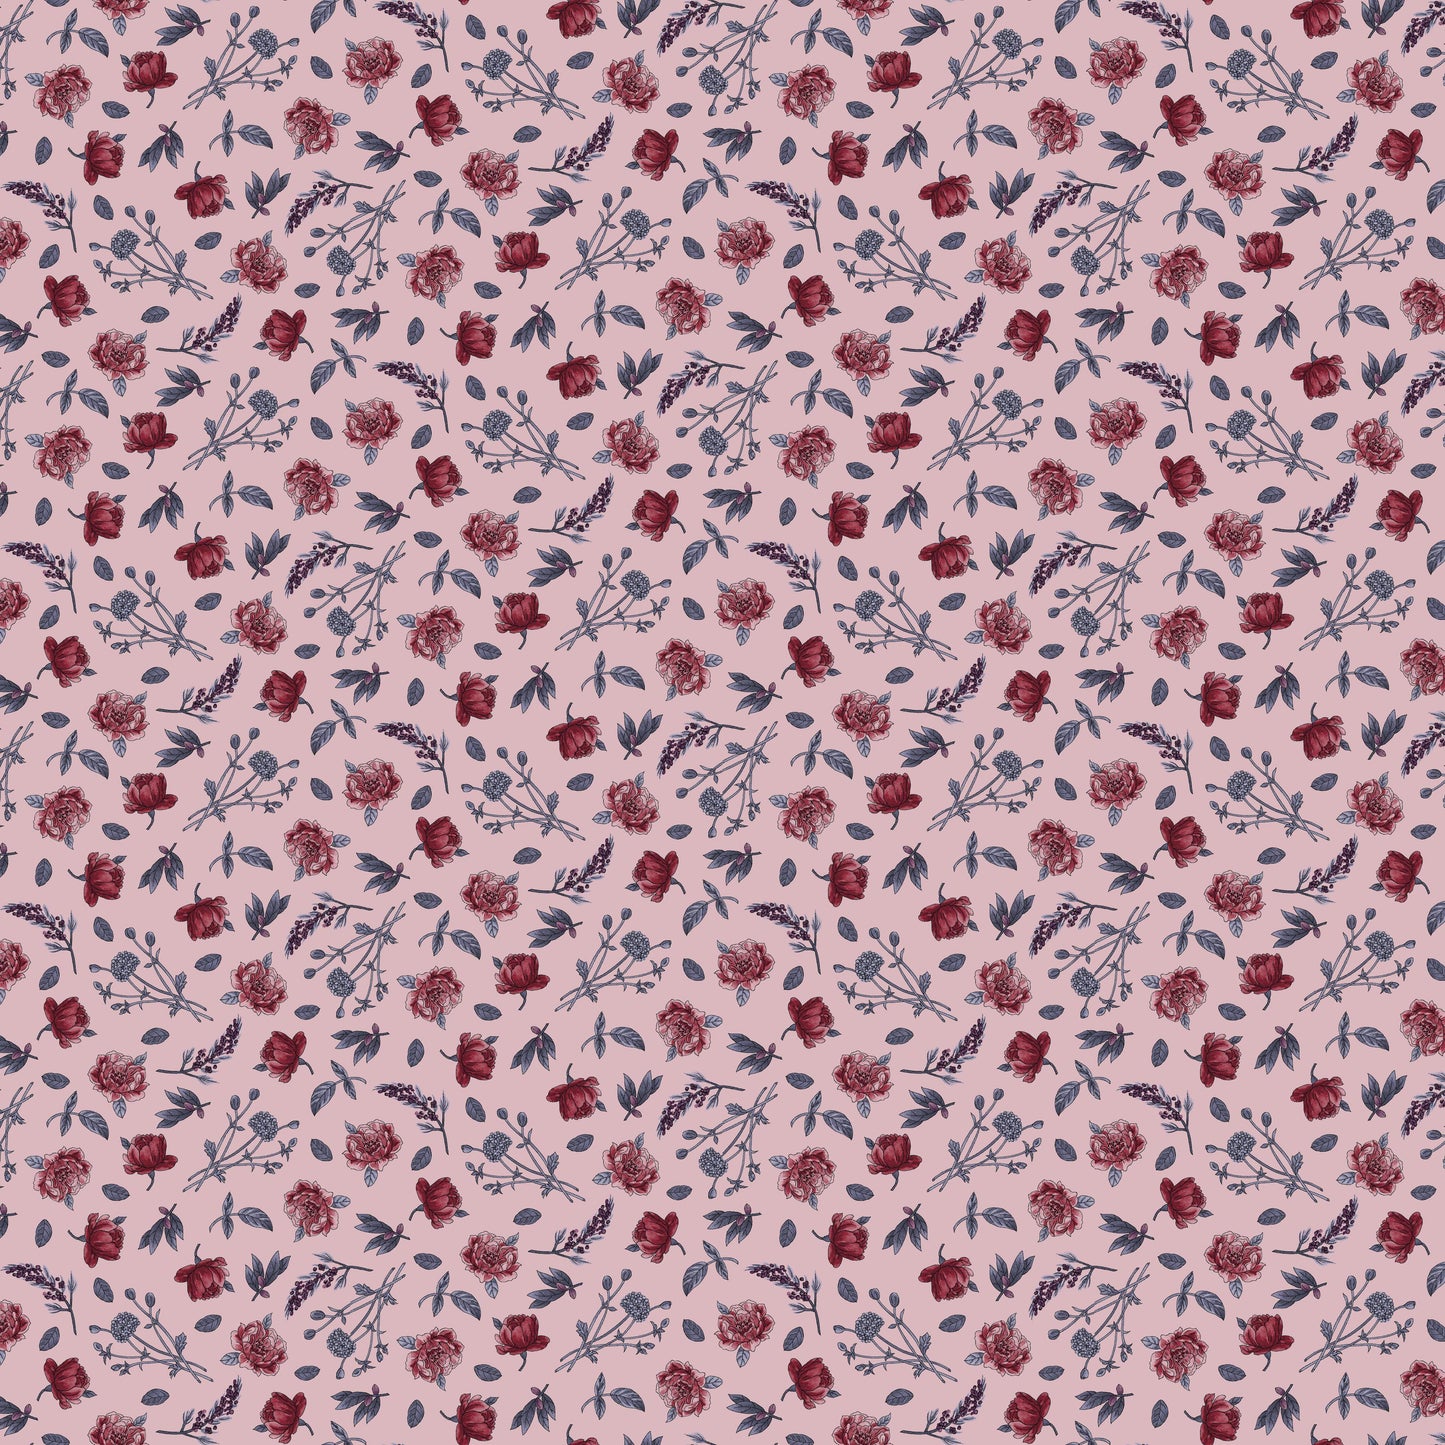 Bones Collection by Melissa Wang Flowers Dusty Rose    7119-21 Cotton Woven Fabric